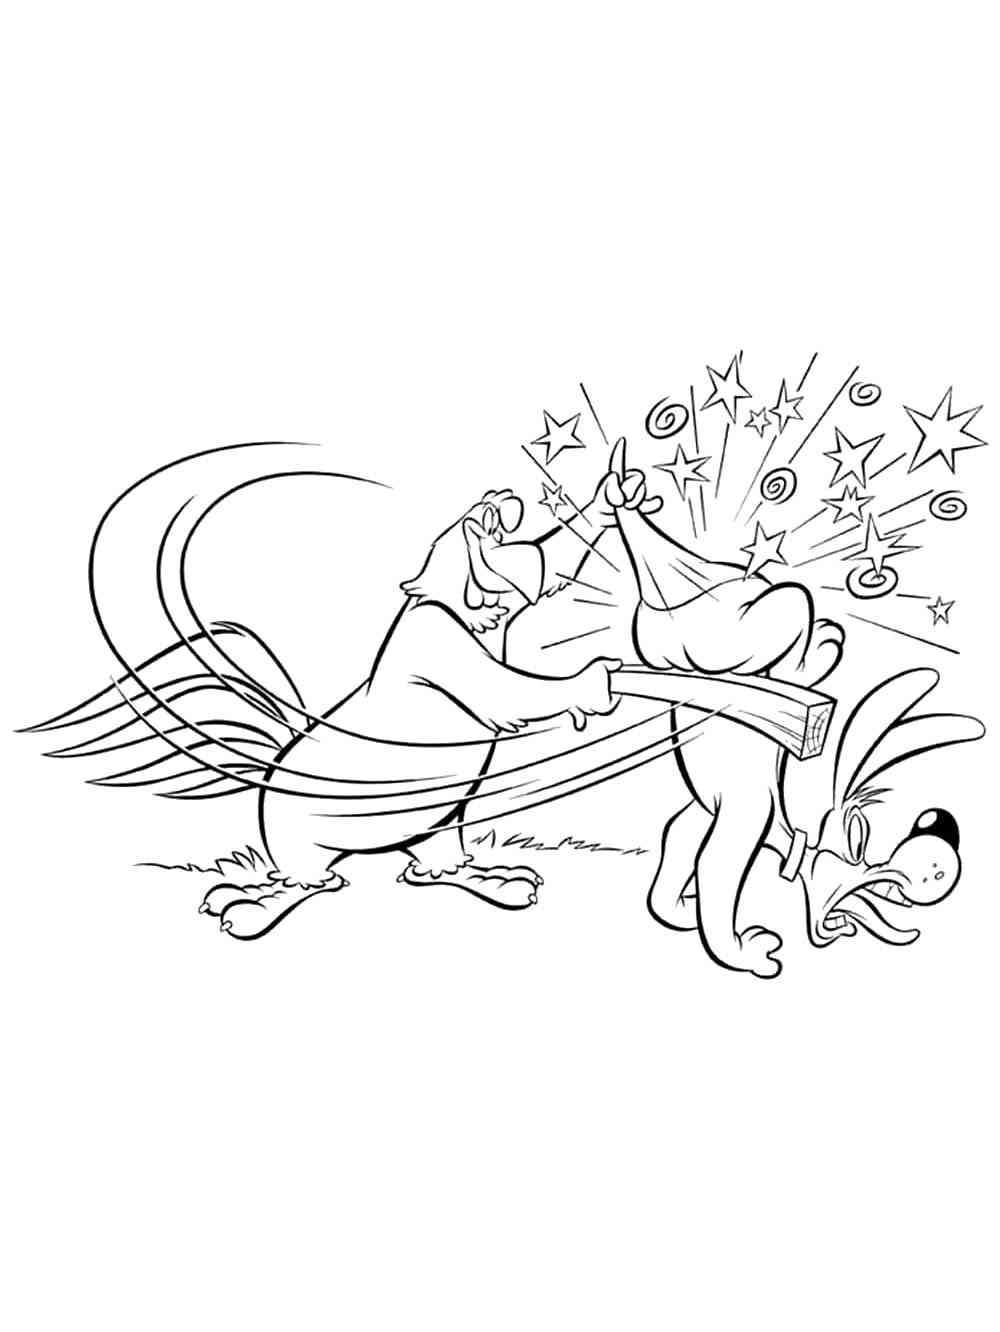 Foghorn Leghorn 8 coloring page